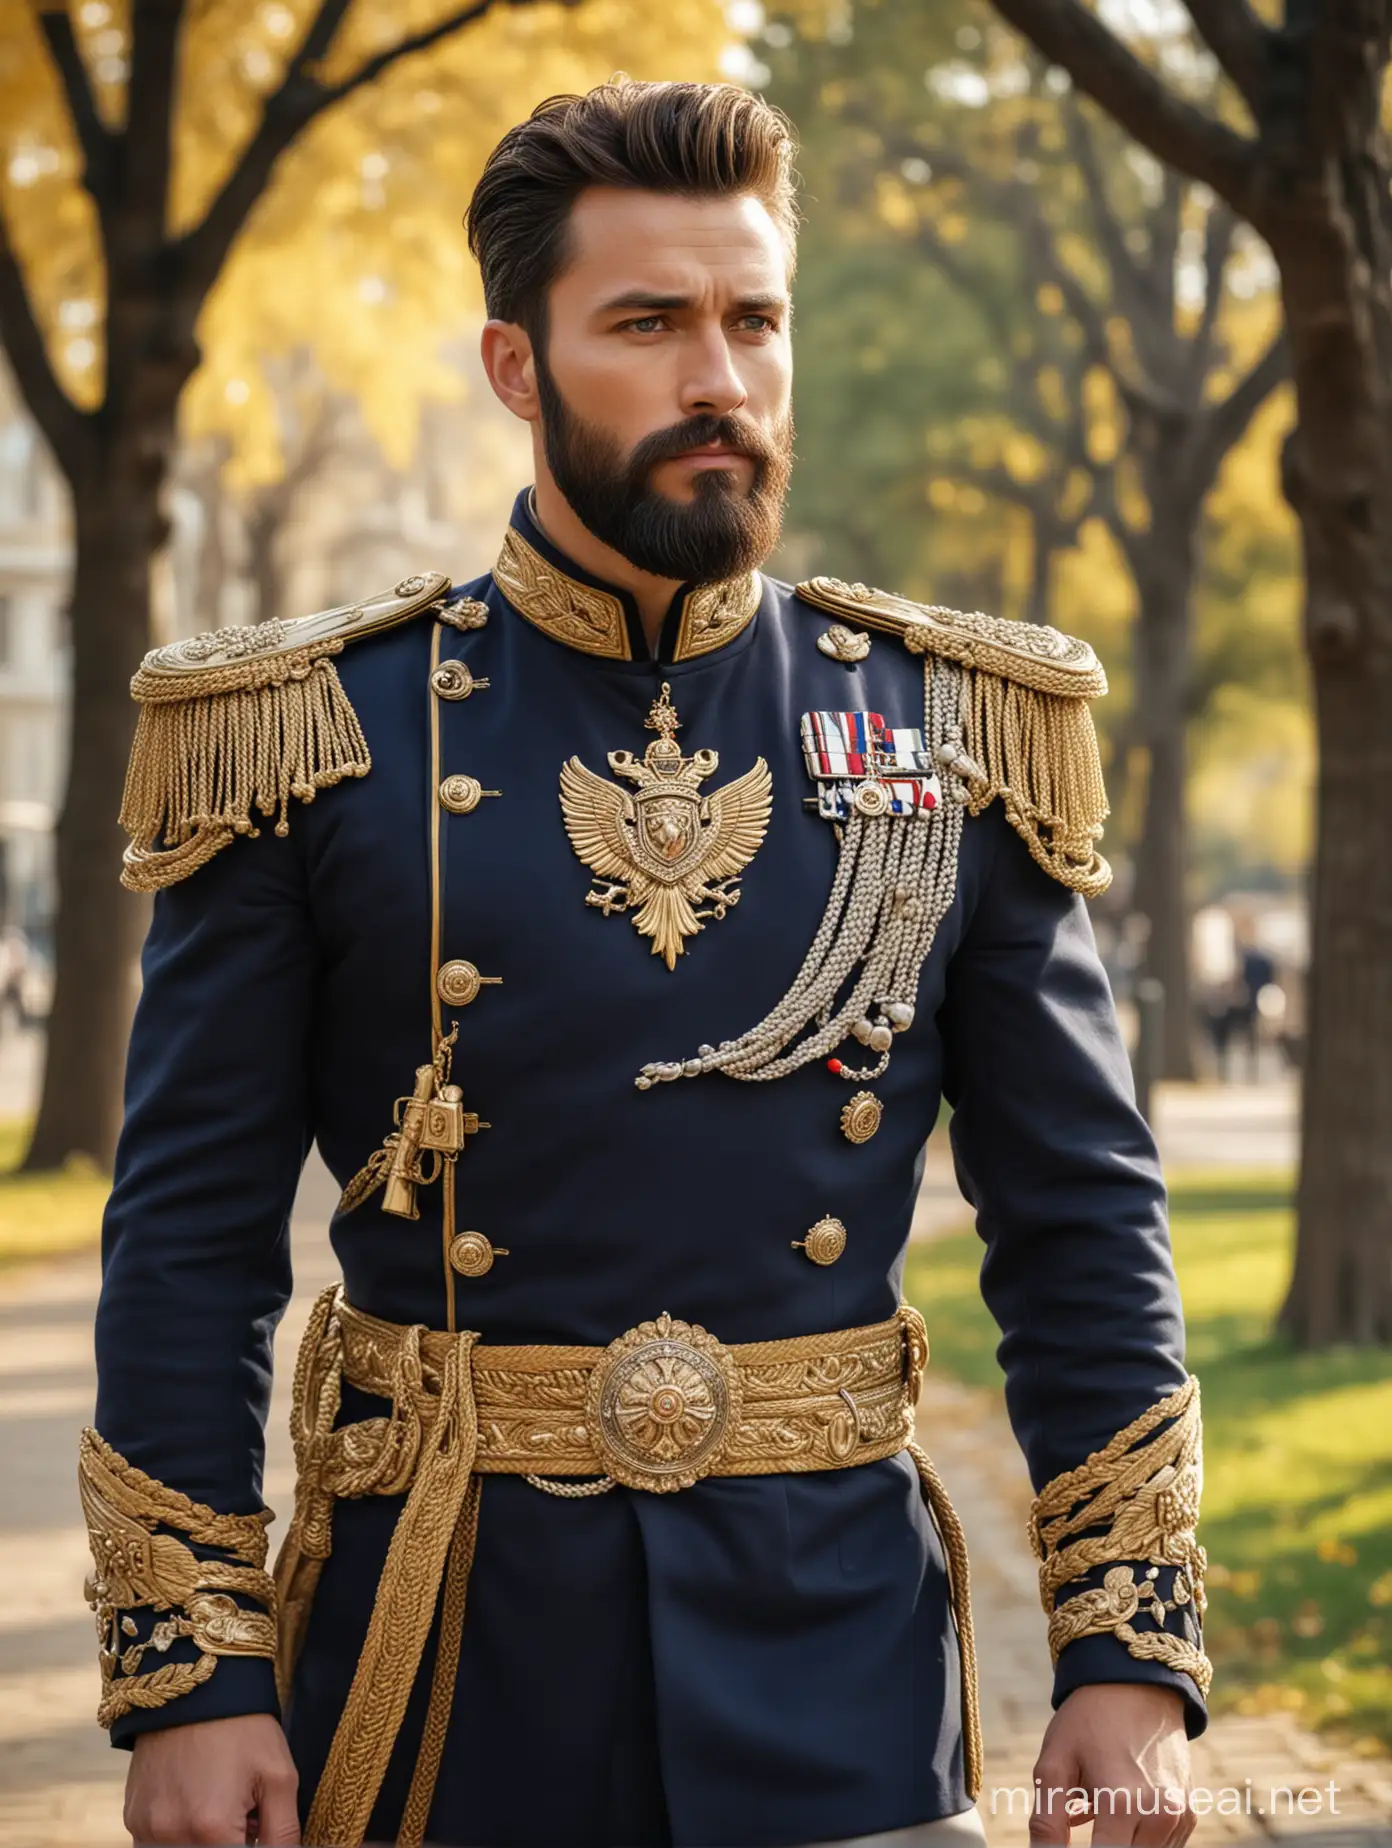 Tall and handsome muscular king with beautiful hairstyle and beard with attractive eyes and Big wide shoulder and chest in High Tech navy and golden cavalry uniform with necklace walking on park